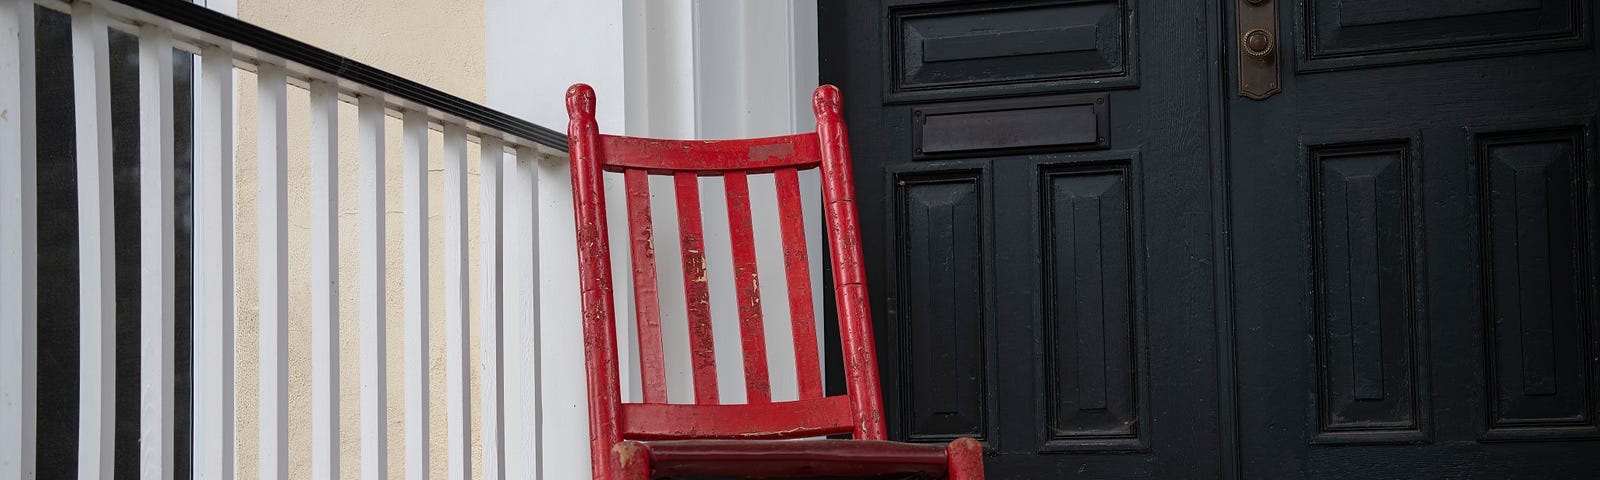 red rocking chair in front of black doors, next to a black and white railing